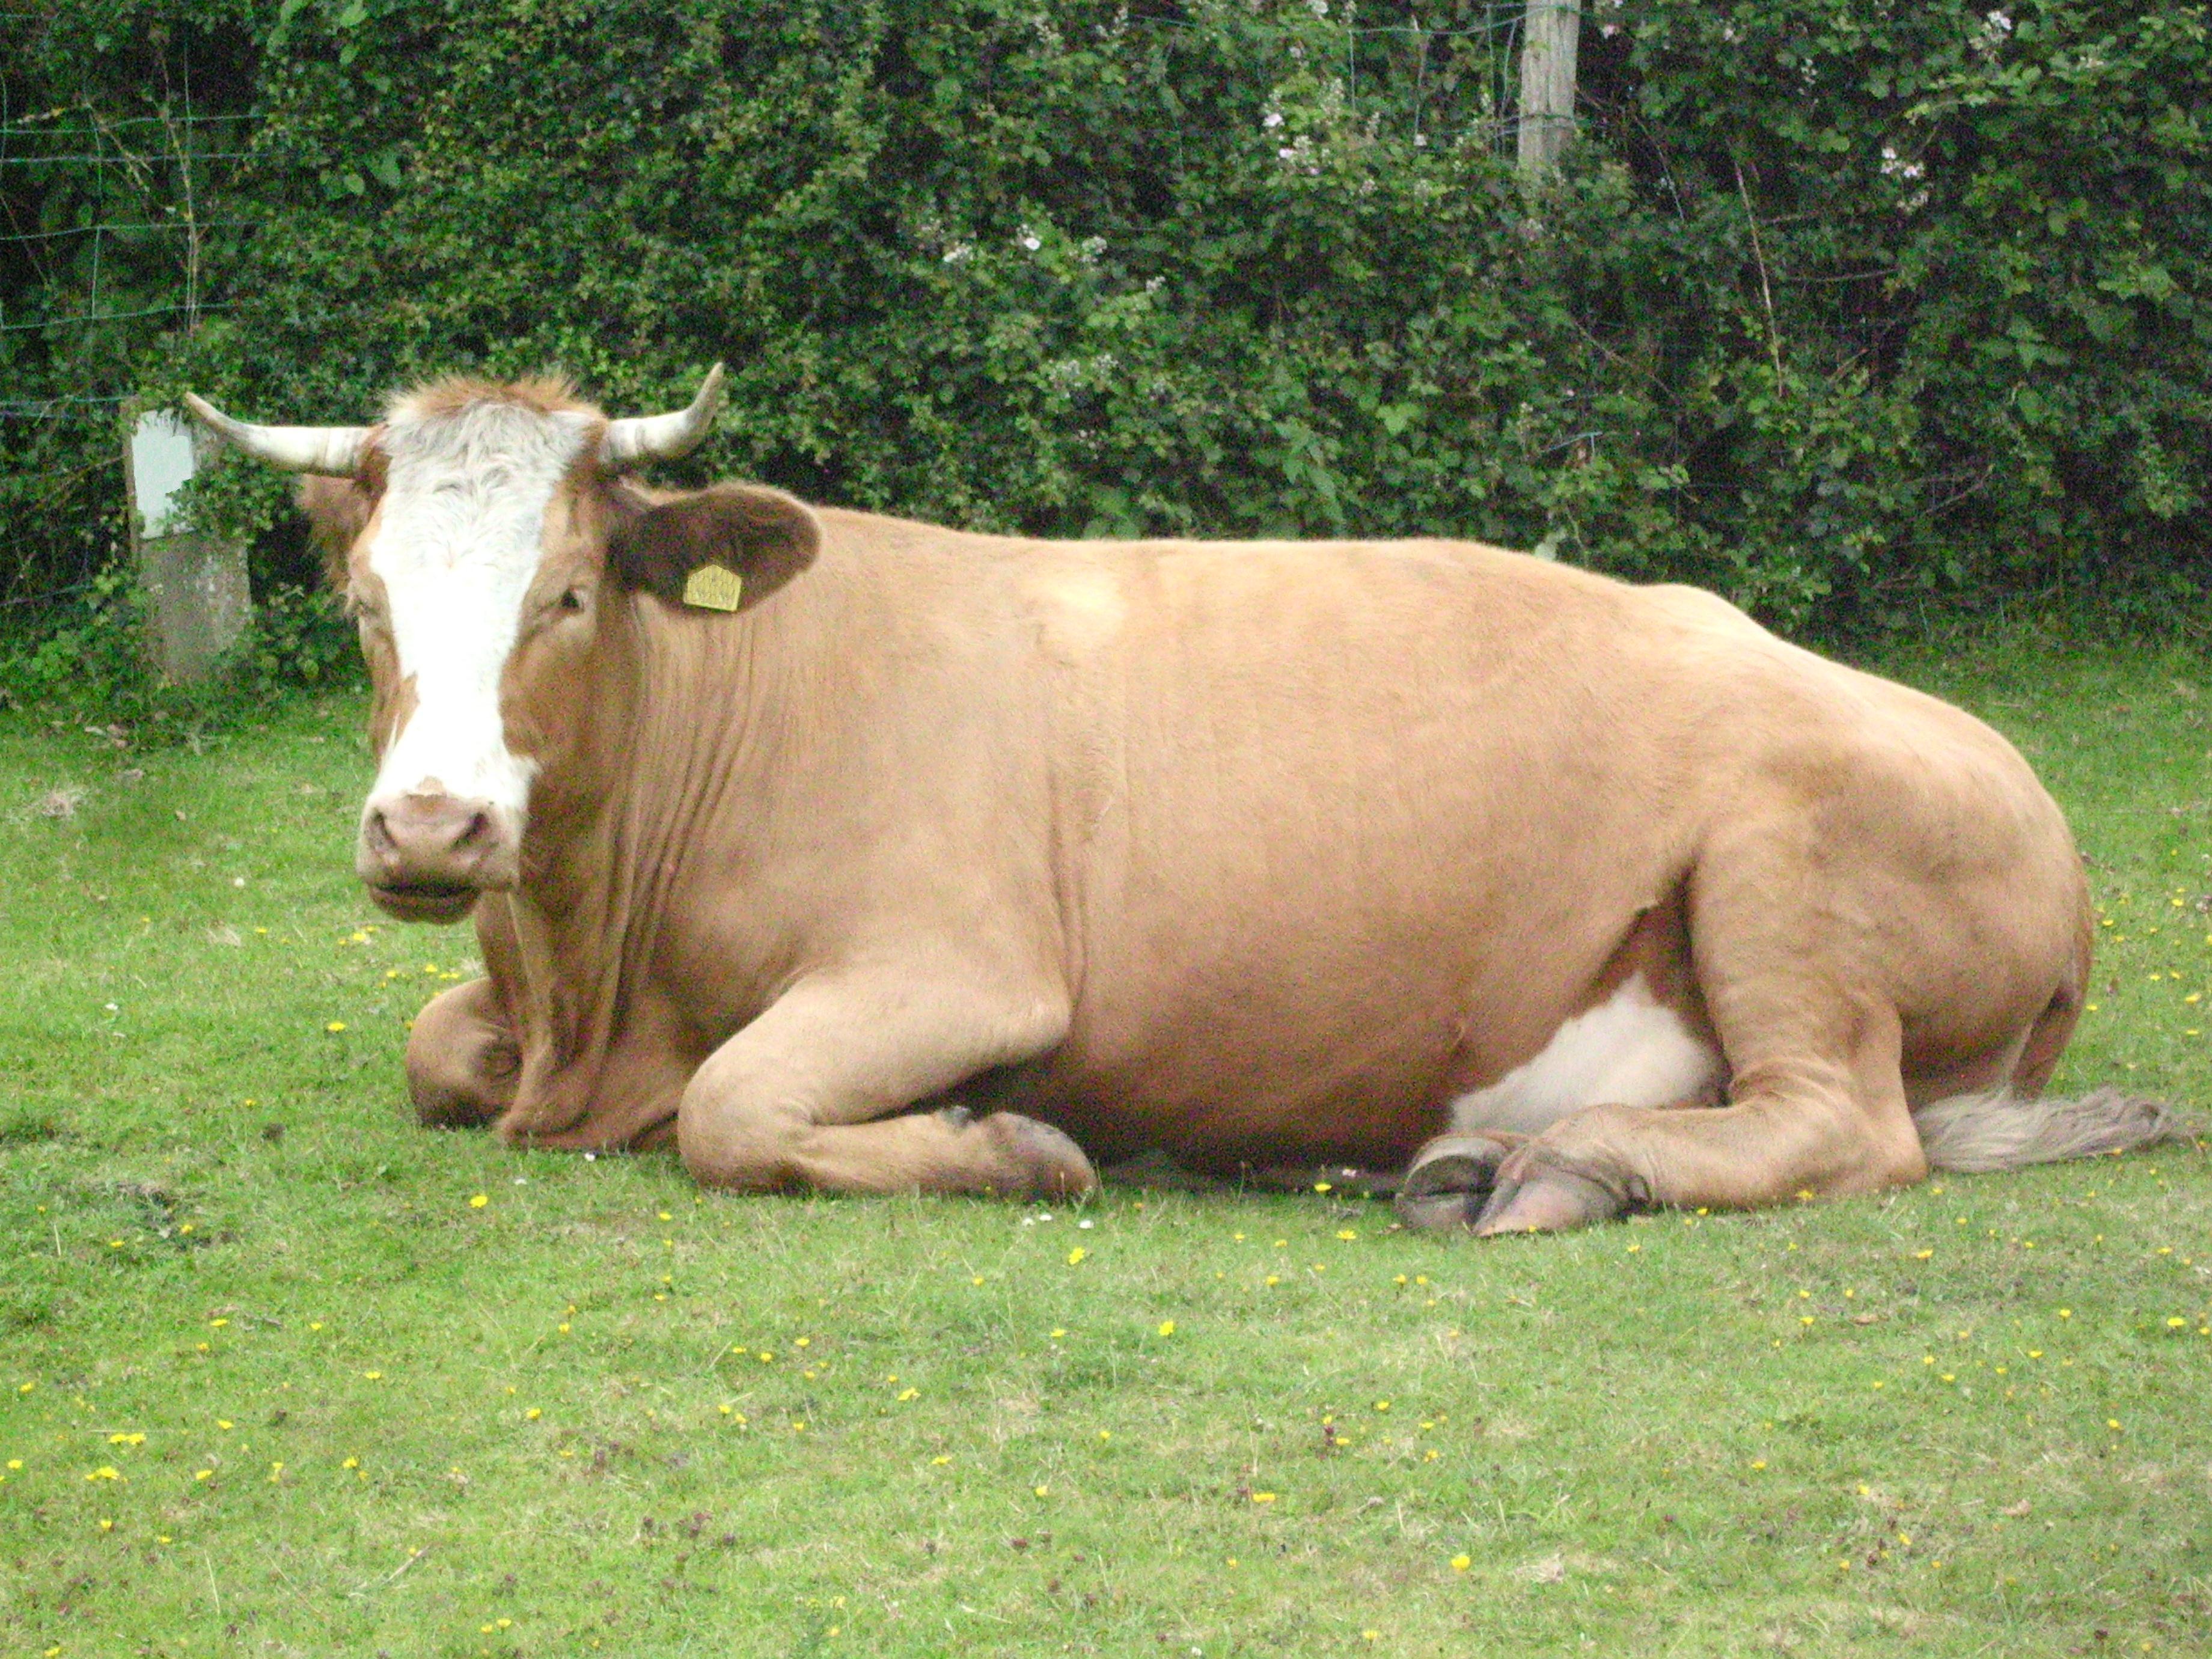 Resting cow photo